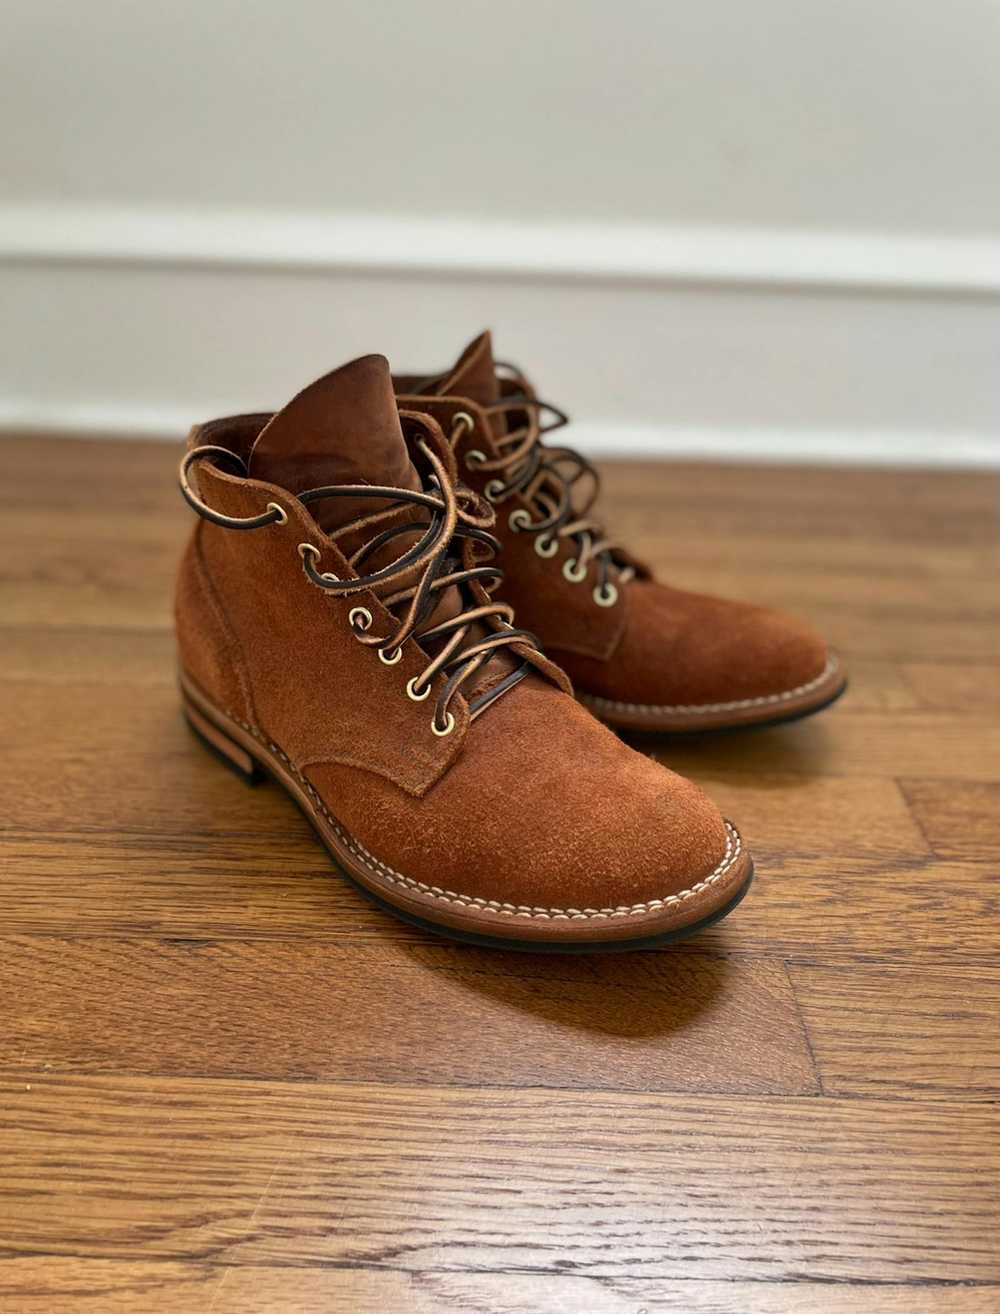 Viberg Viberg Service Boot in Aged Bark Roughout - image 2